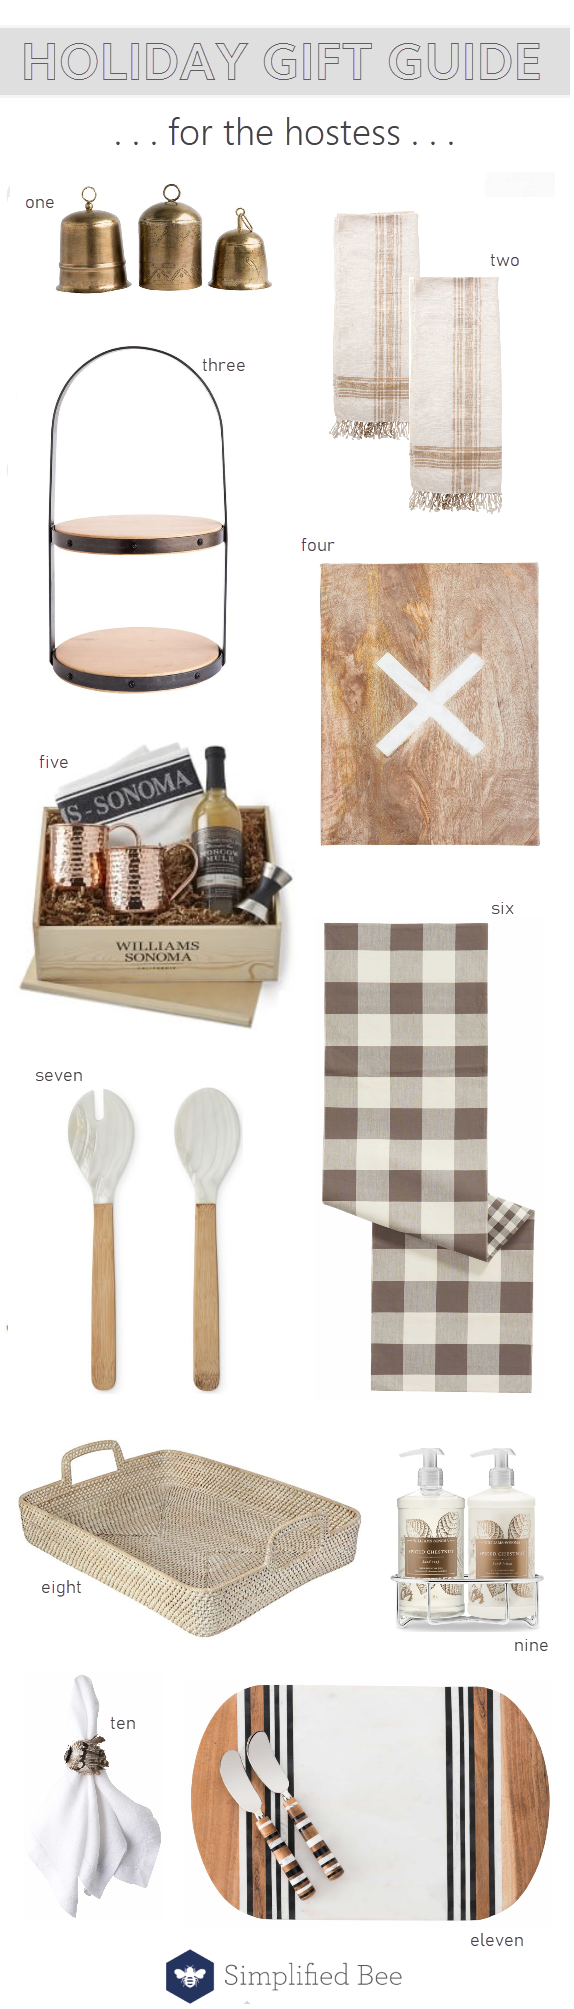 hostess gifts :: gift guide 2018